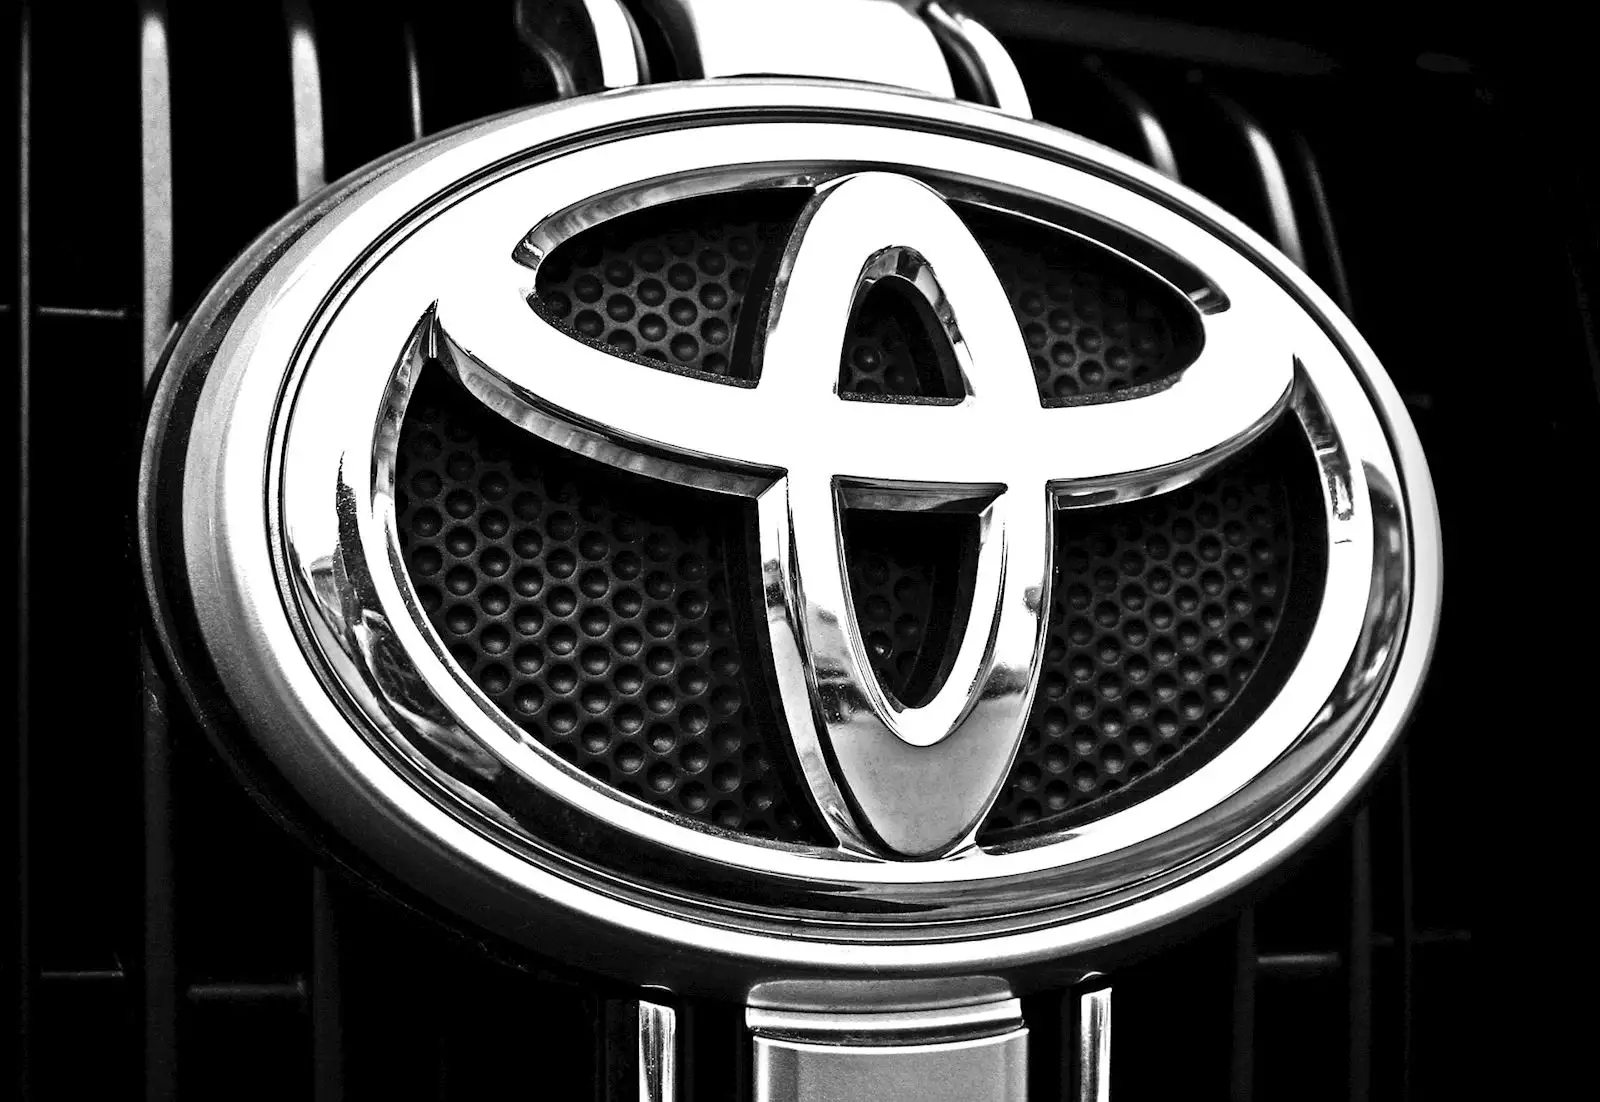 15 Interesting Facts About Toyota That Will Make You Love This "Jap" Even More